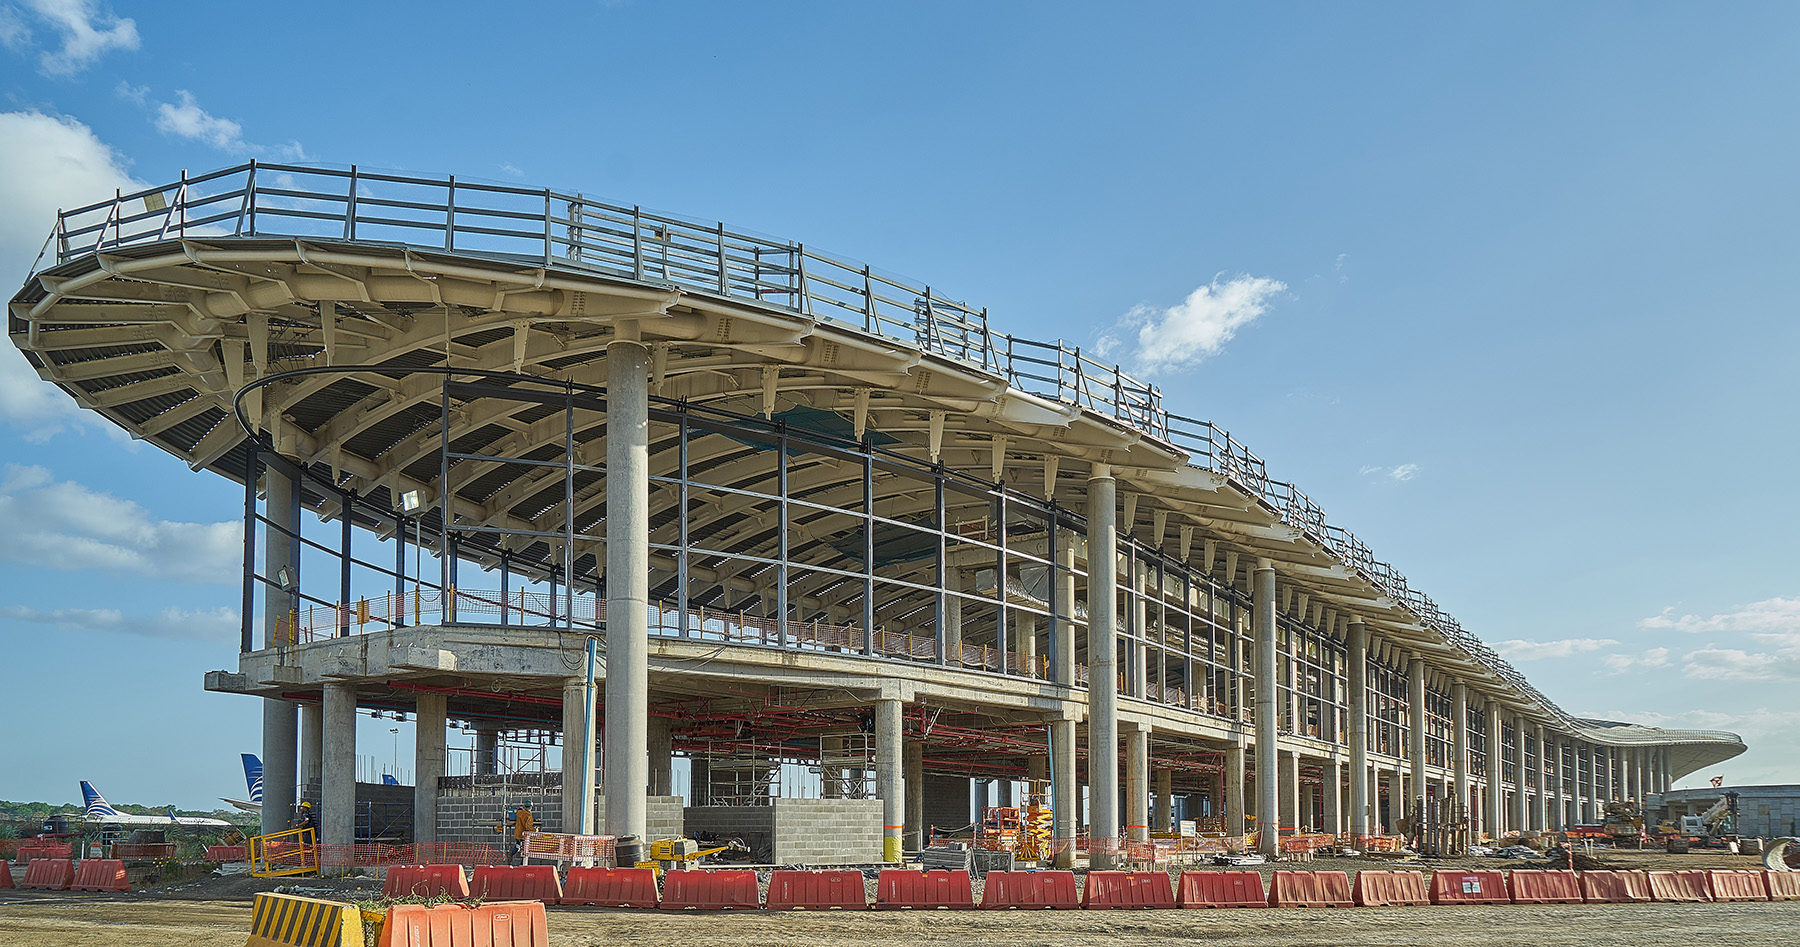 An in-construction shot of a new airport terminal showing foundation and roof supports among other objects.